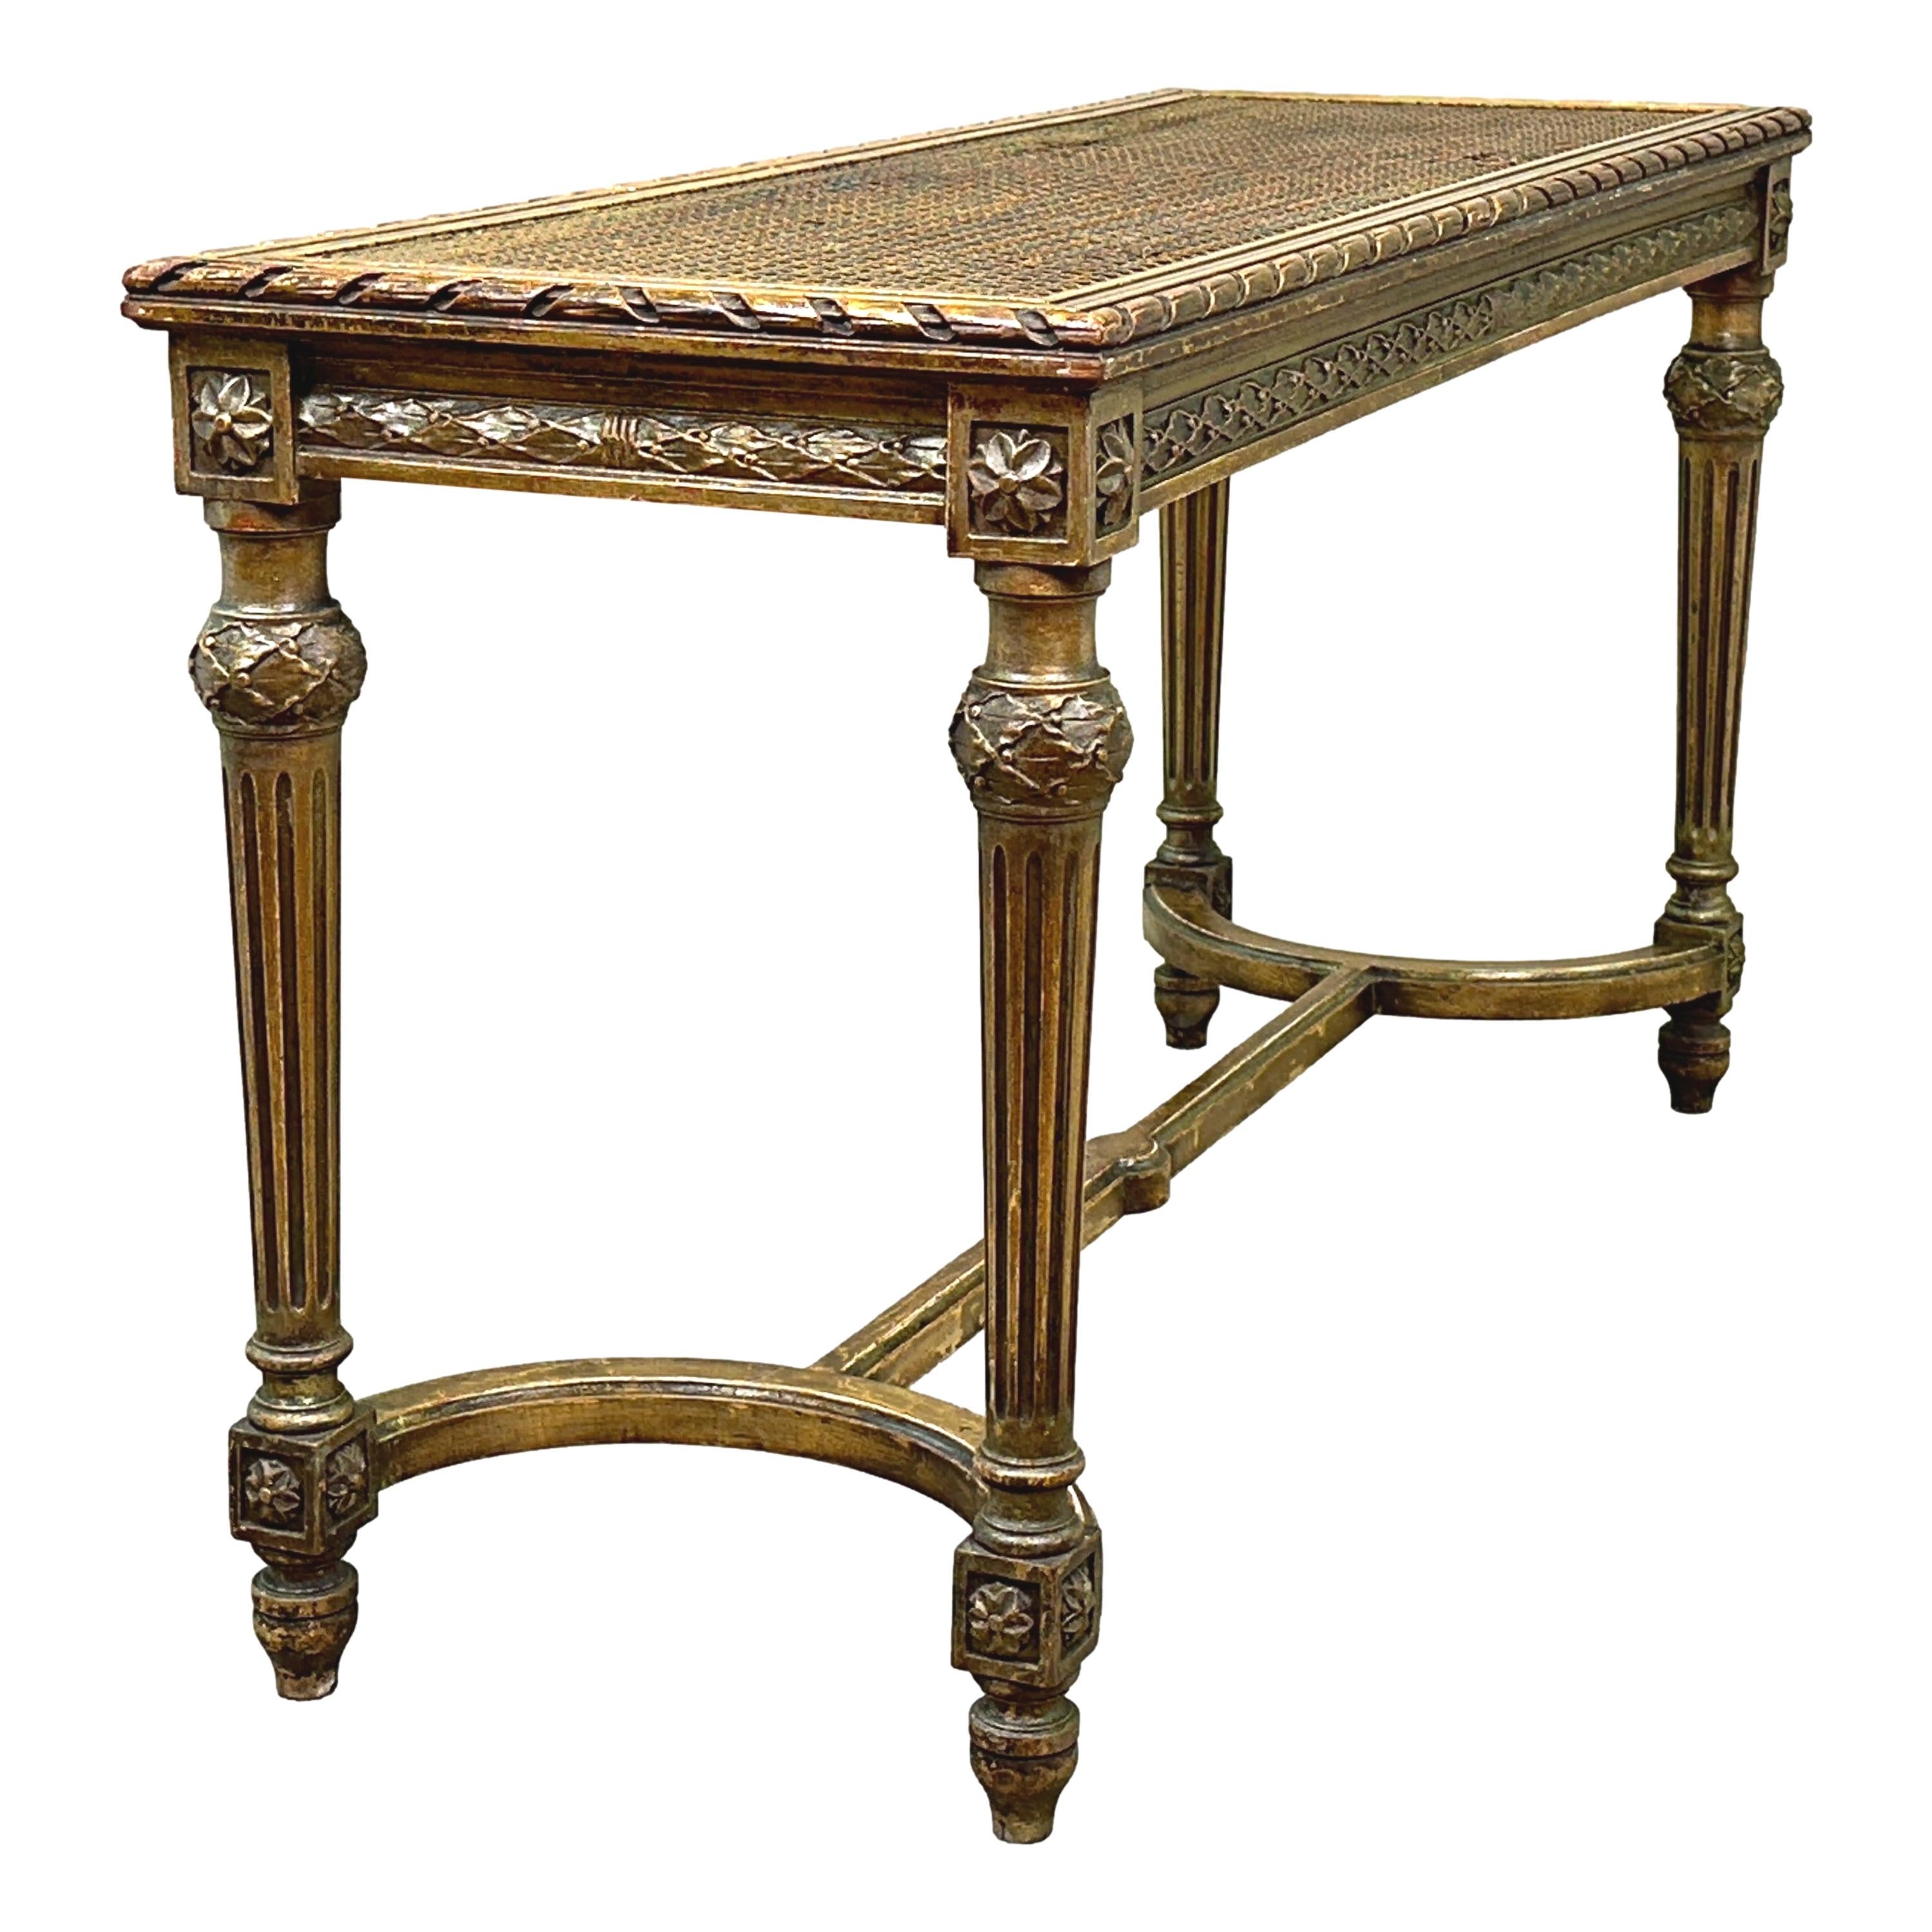 A Charming And Extremely Attractive Early 20th Century Giltwood Rectangular Luggage Rack, Or Stool, Having Original Caned Top, Or Seat, Over Well Carved Frame. Raised On Elegant Turned, Tapering, Fluted Legs United By Cross Stretcher.


Its